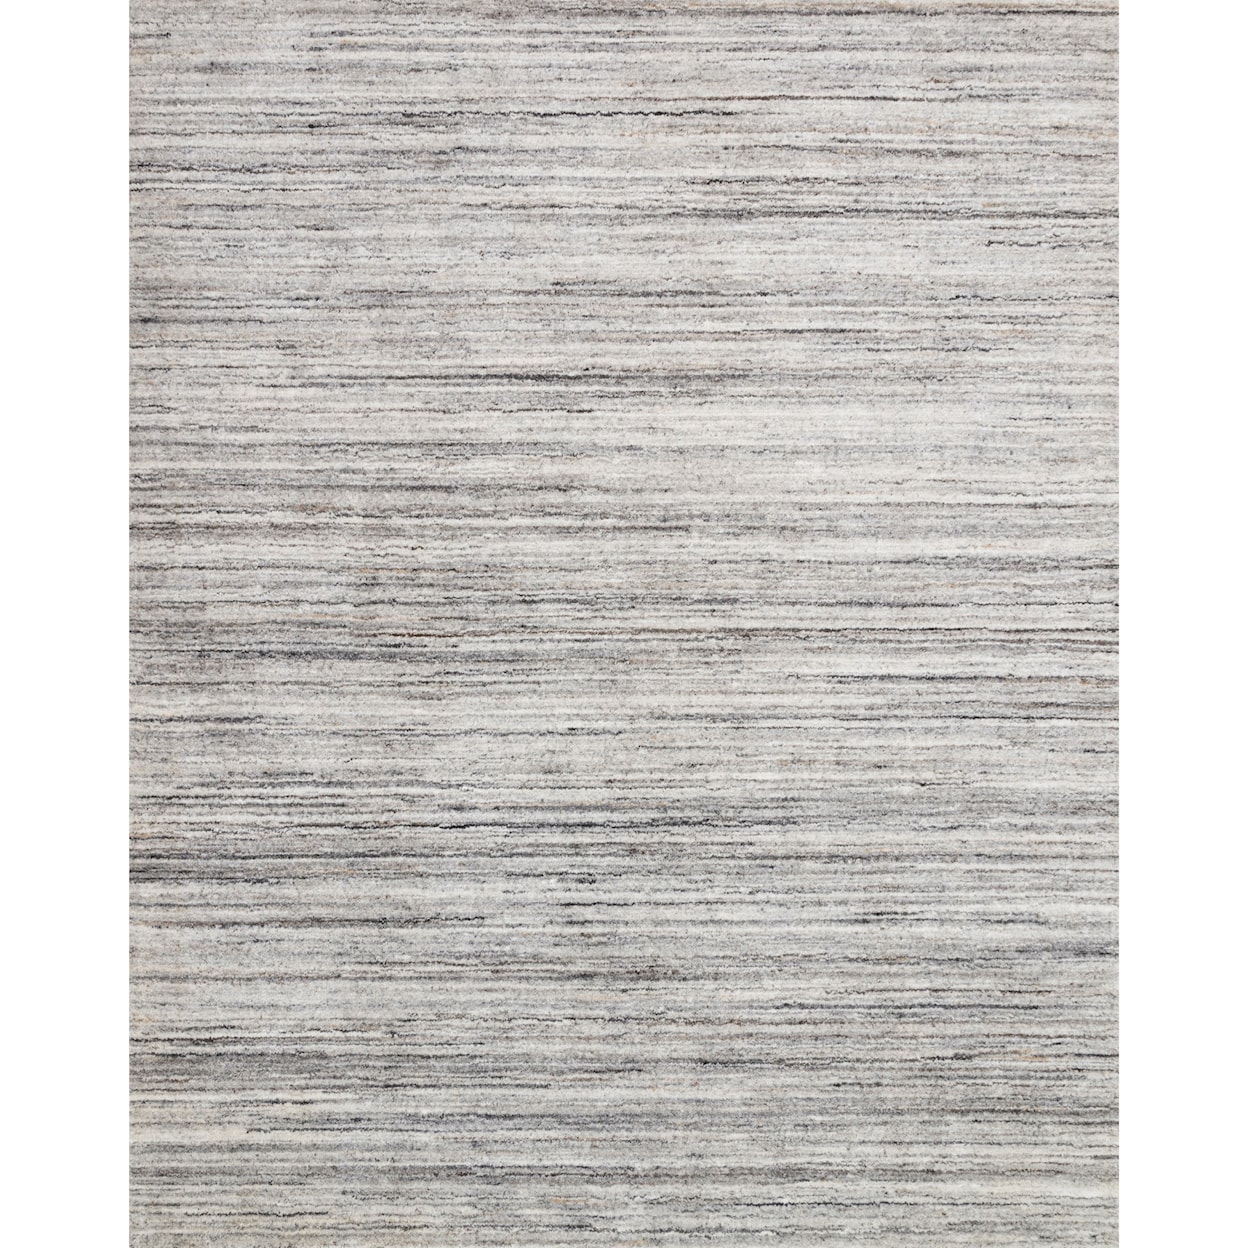 Reeds Rugs Brandt 9'3" x 13' Silver / Stone Rug